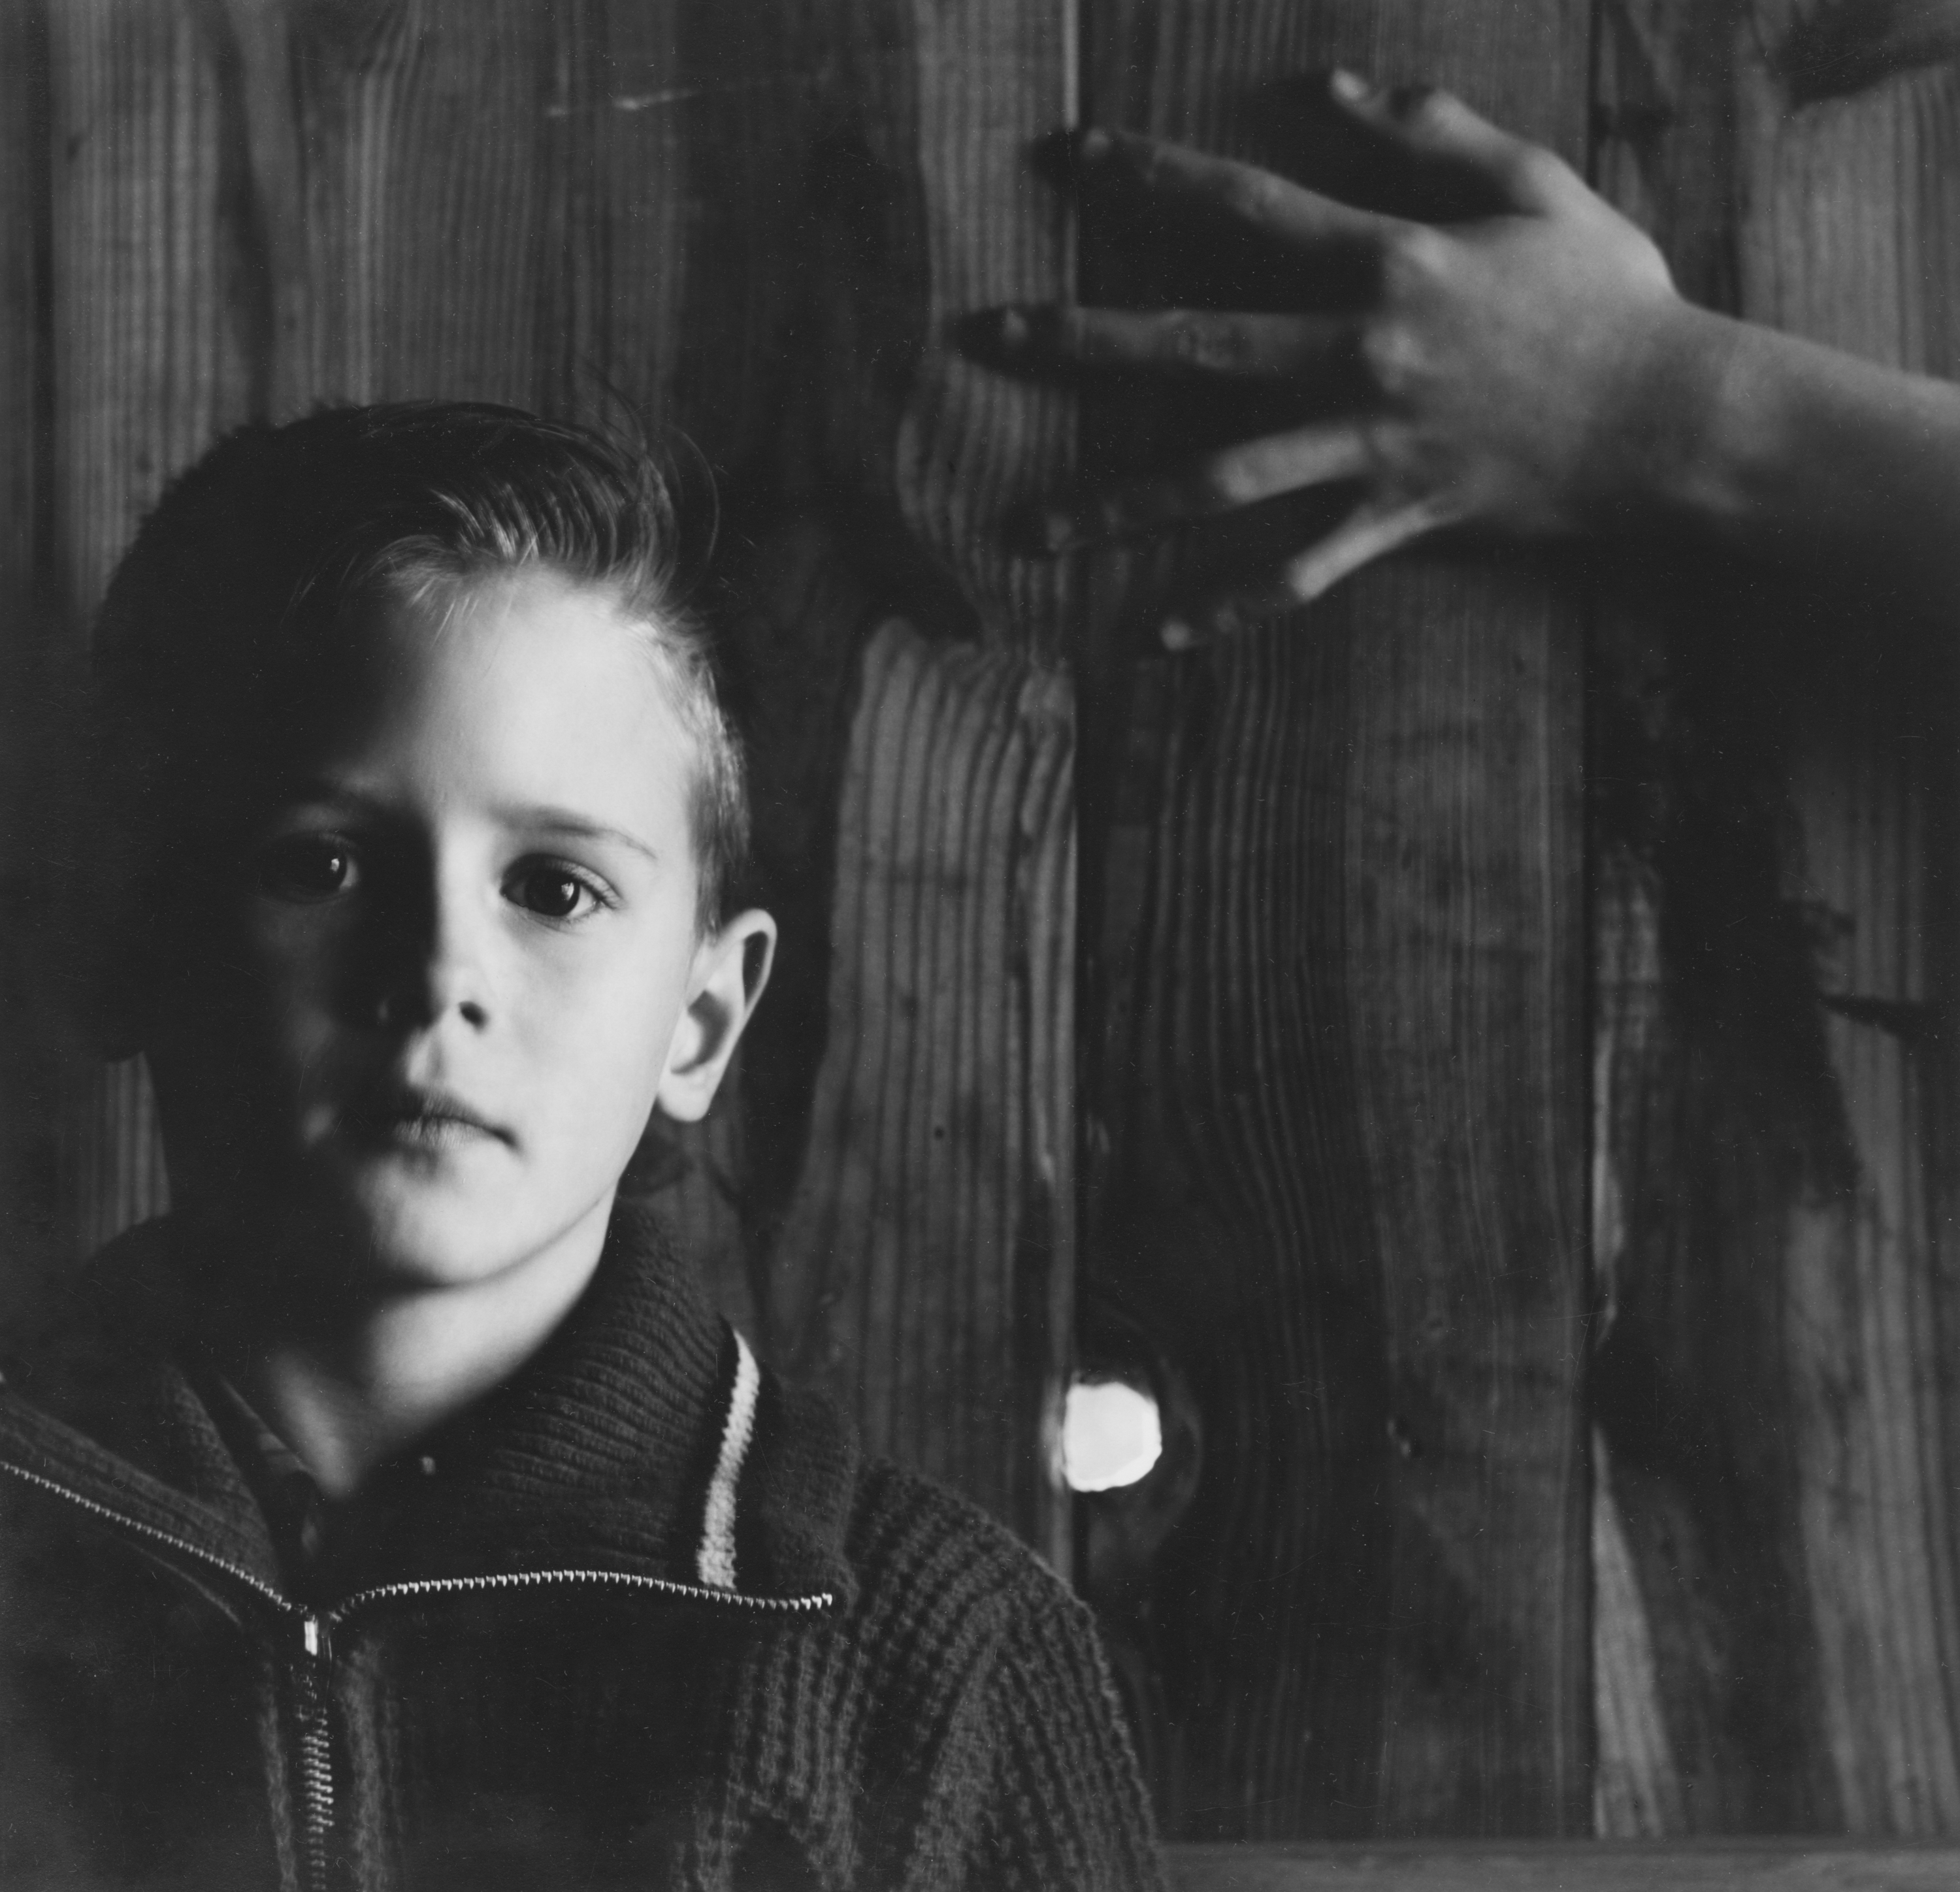 Black and white photograph of a child in front of wooden wall with a hand extended on top right of frame